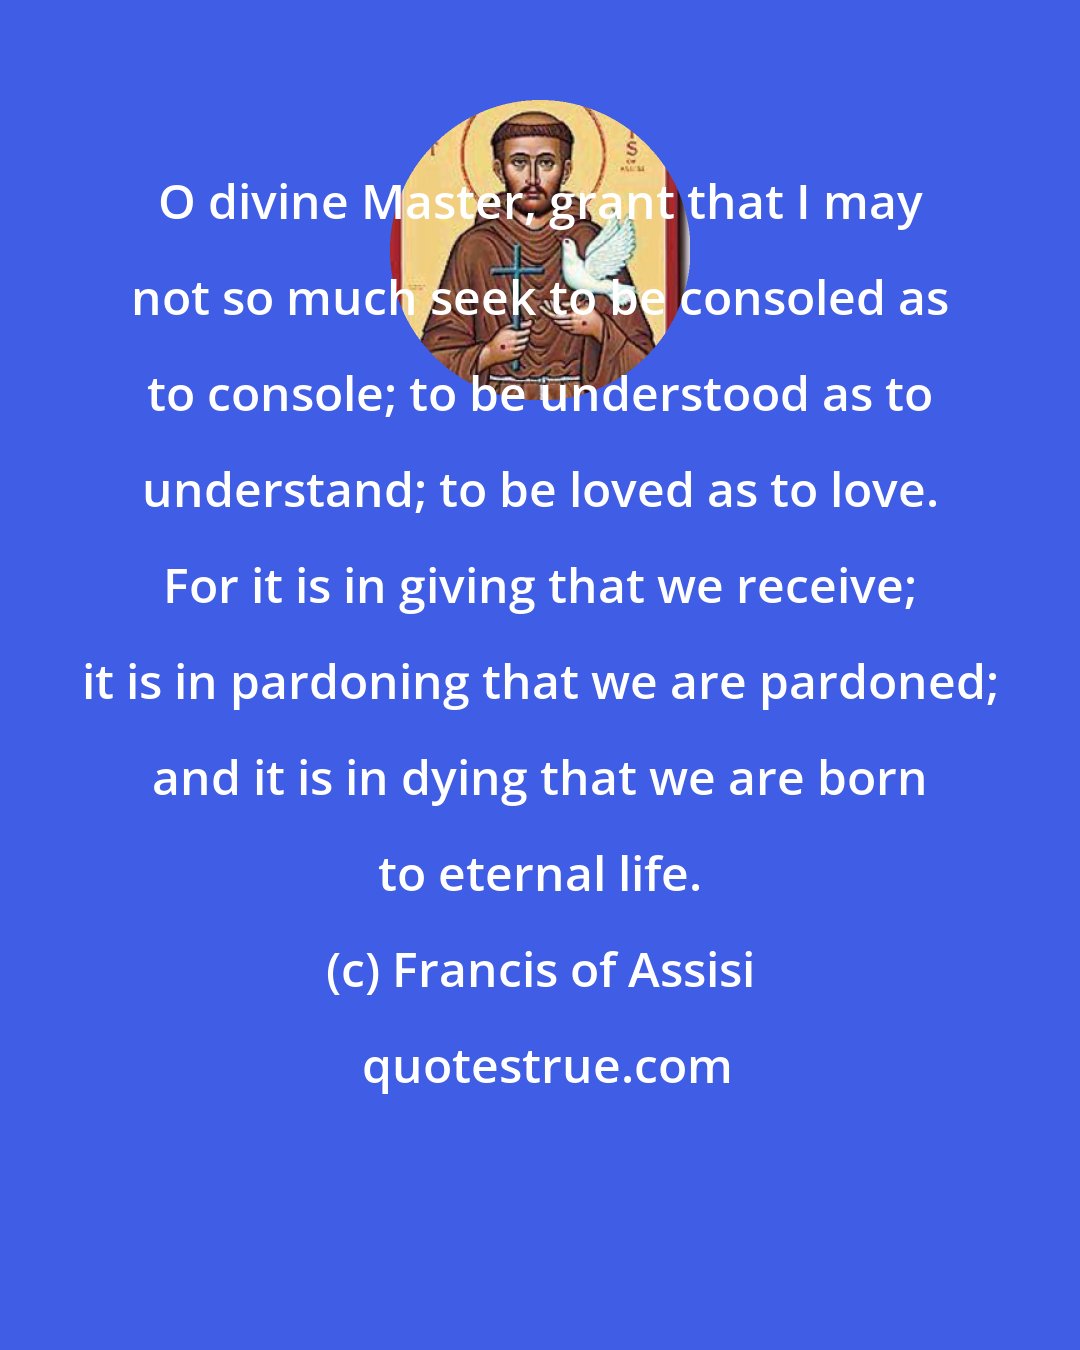 Francis of Assisi: O divine Master, grant that I may not so much seek to be consoled as to console; to be understood as to understand; to be loved as to love. For it is in giving that we receive; it is in pardoning that we are pardoned; and it is in dying that we are born to eternal life.